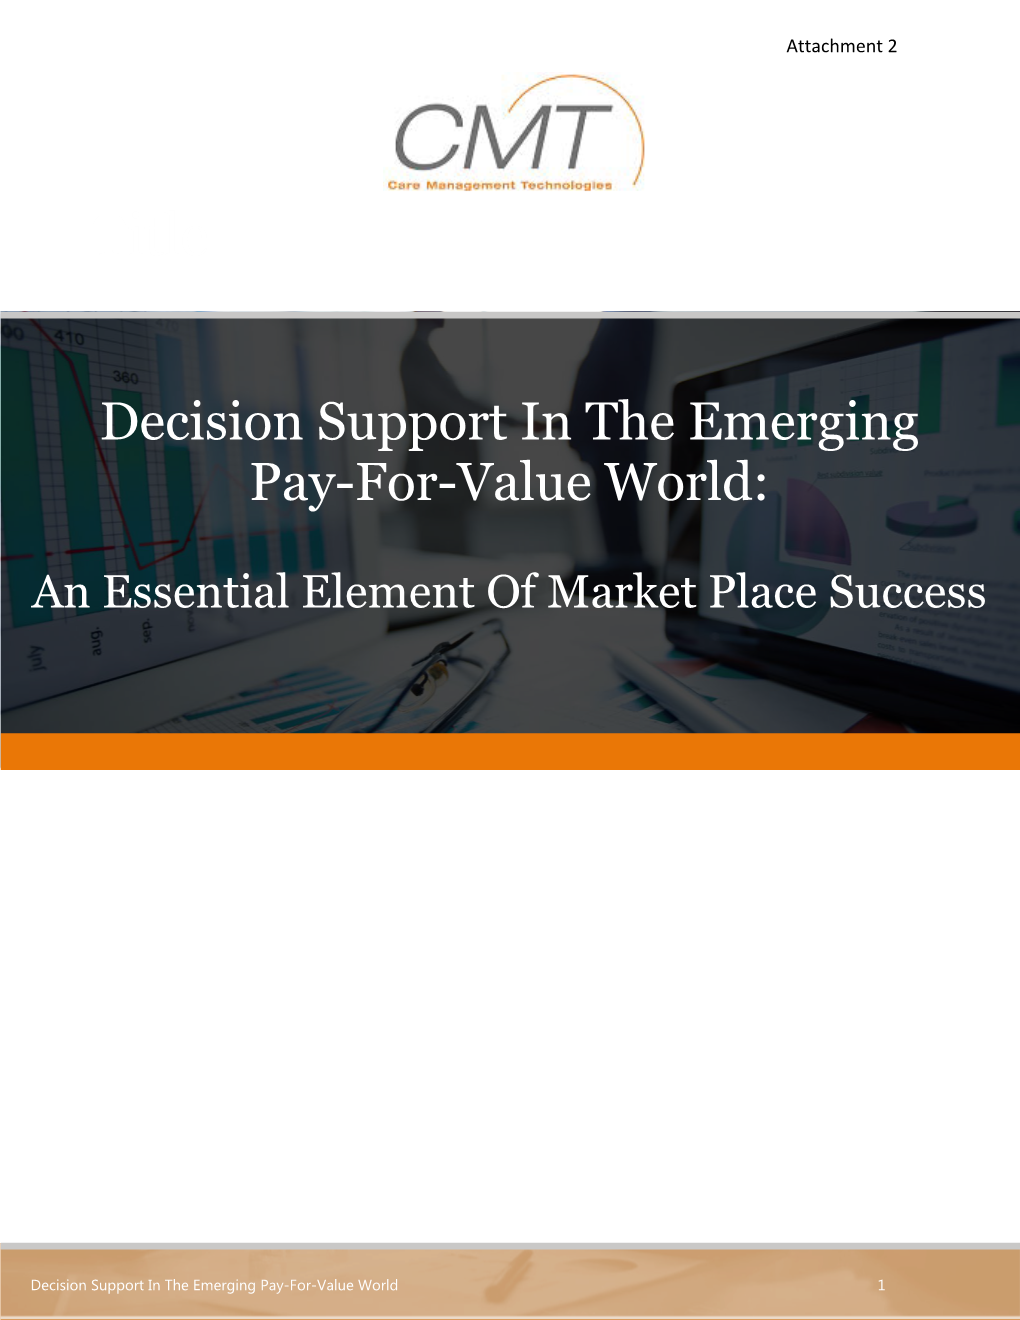 Decision Support in the Emerging Pay-For-Value World